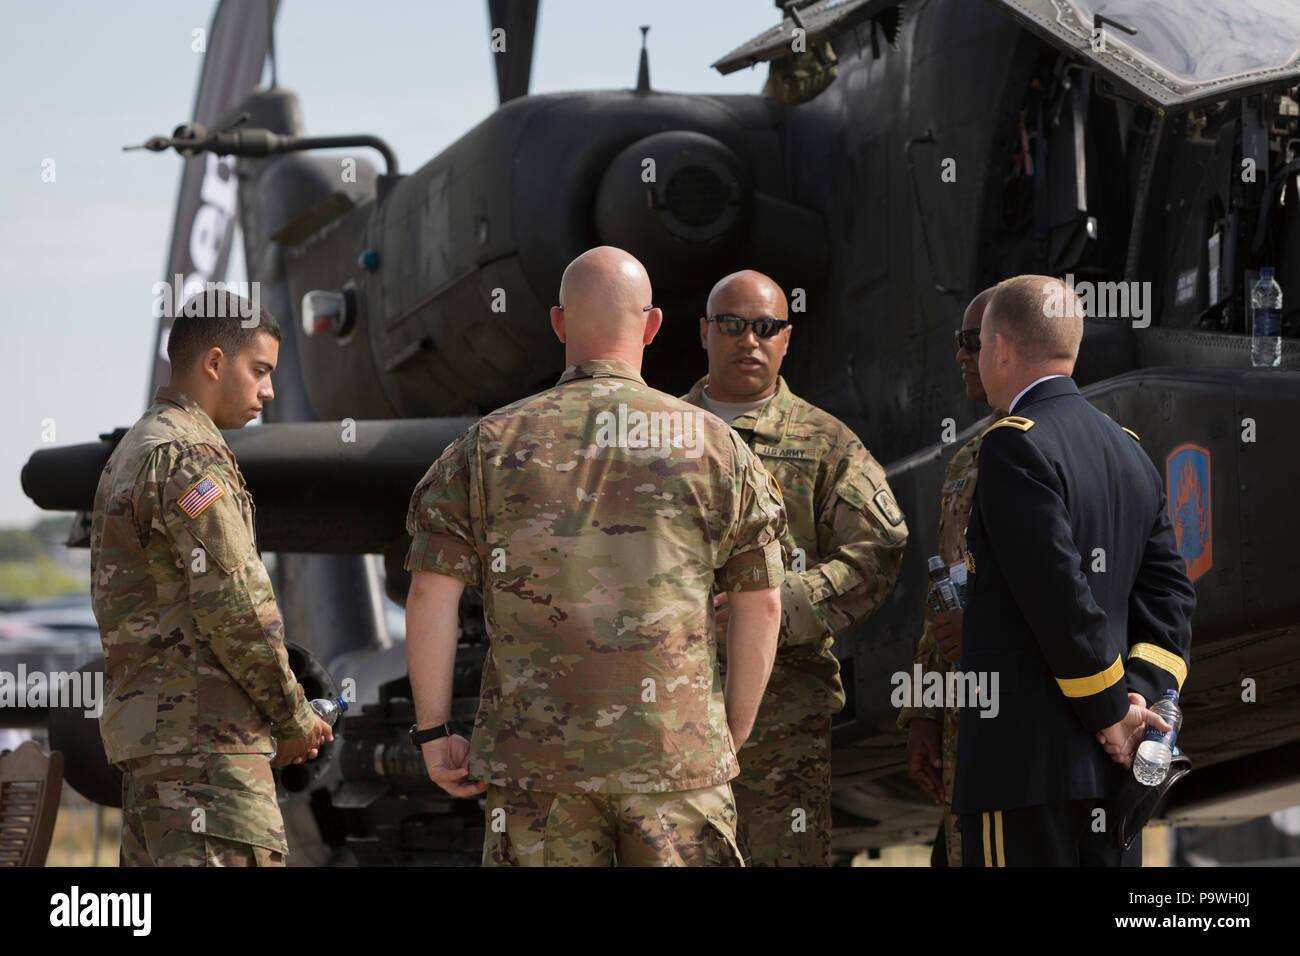 US Army personnel of an Apache helicopter at the Farnborough Airshow, on 16th July 2018, in Farnborough, England. Stock Photo